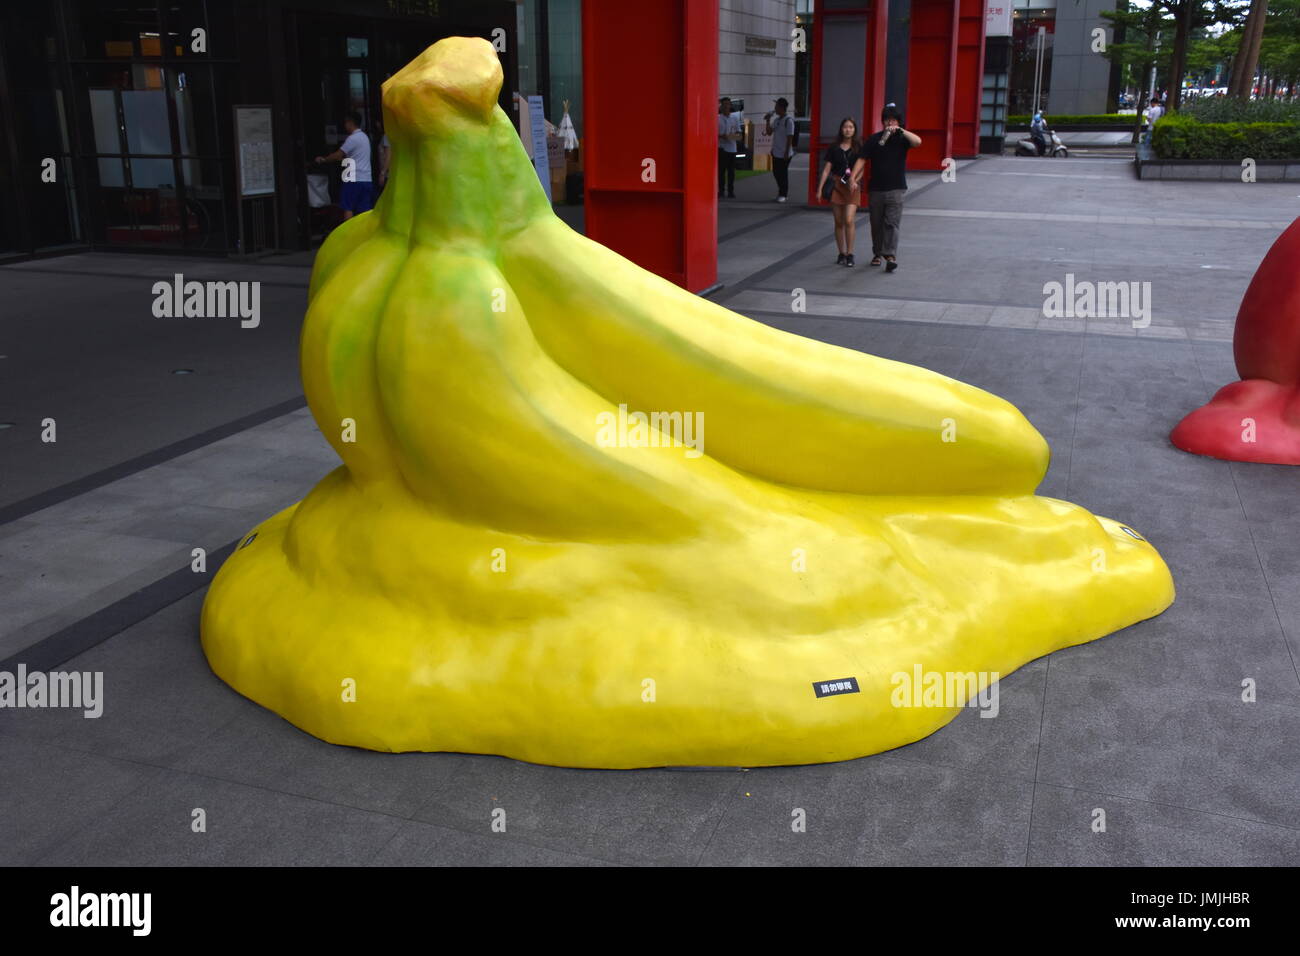 Giant bananas sculpture sits in front of shopping mall for people to enjoy, Taipei, Taiwan. Stock Photo